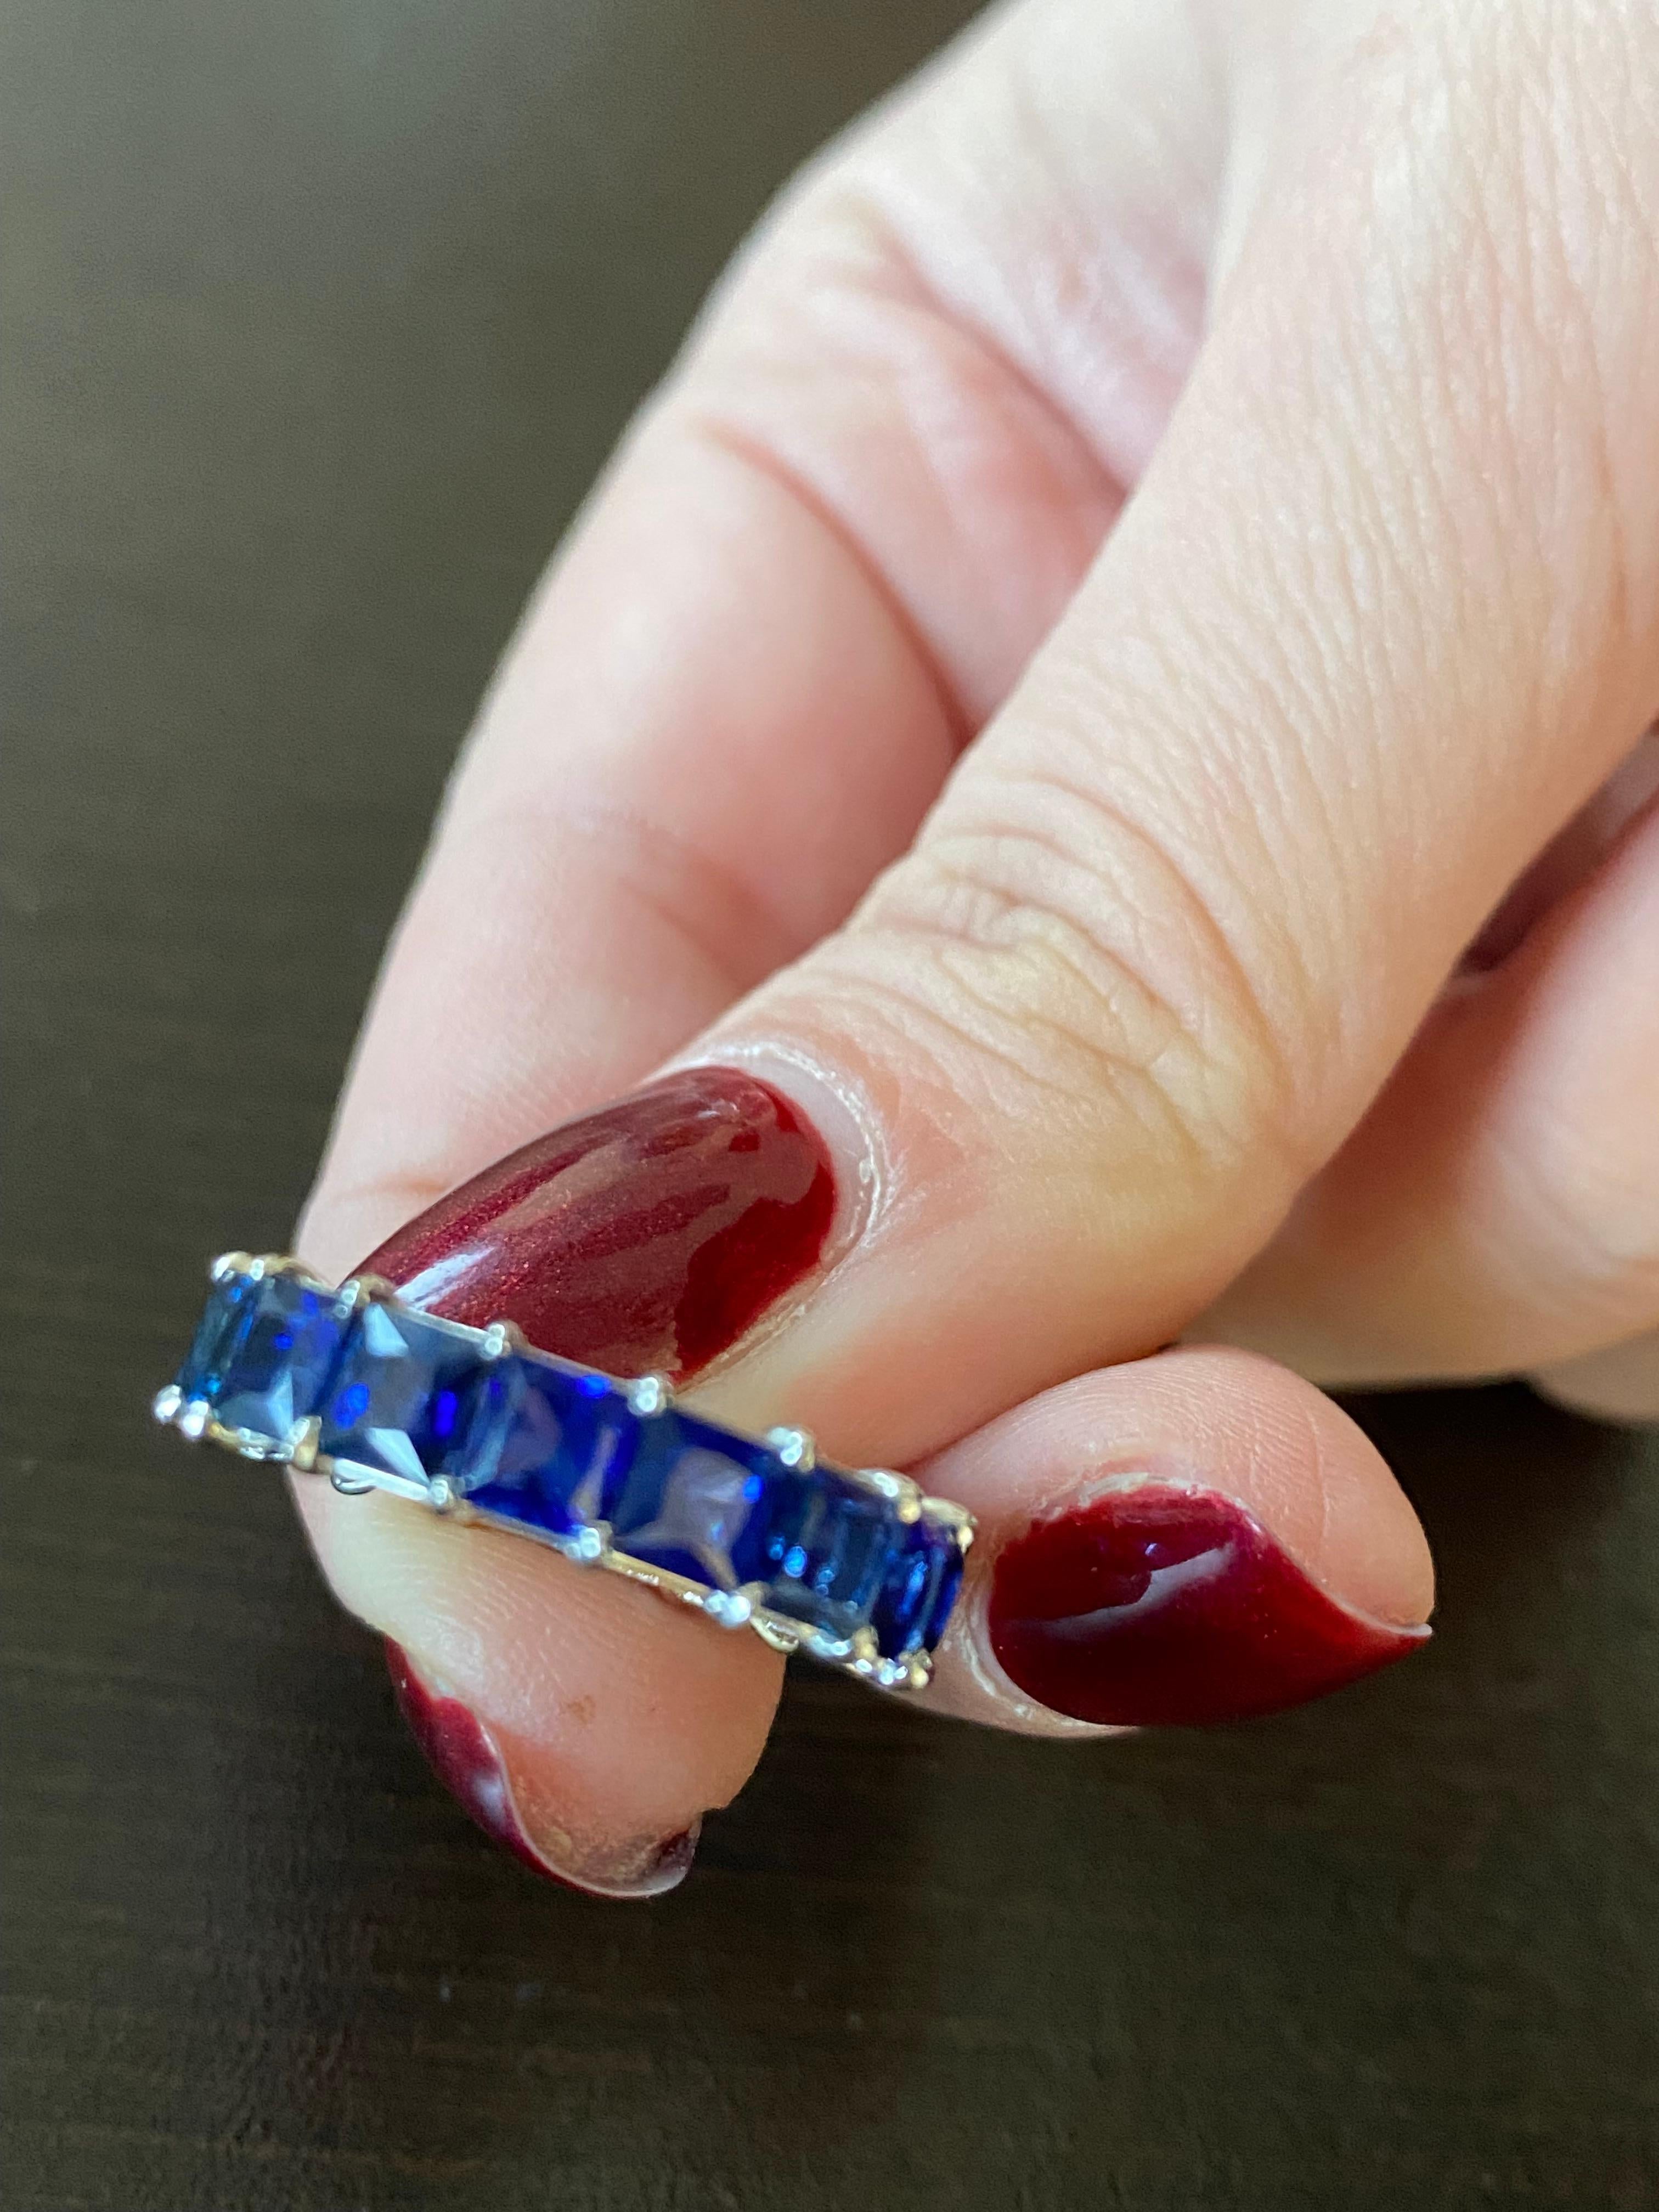 Princess cut sapphires set in 14K white gold. Each stone weighs approximately 0.40 carats, total weight is 6.77 carats. The band is set with 17 stones. The sapphires are Ceylon. The ring is a size 6 and can be sized.